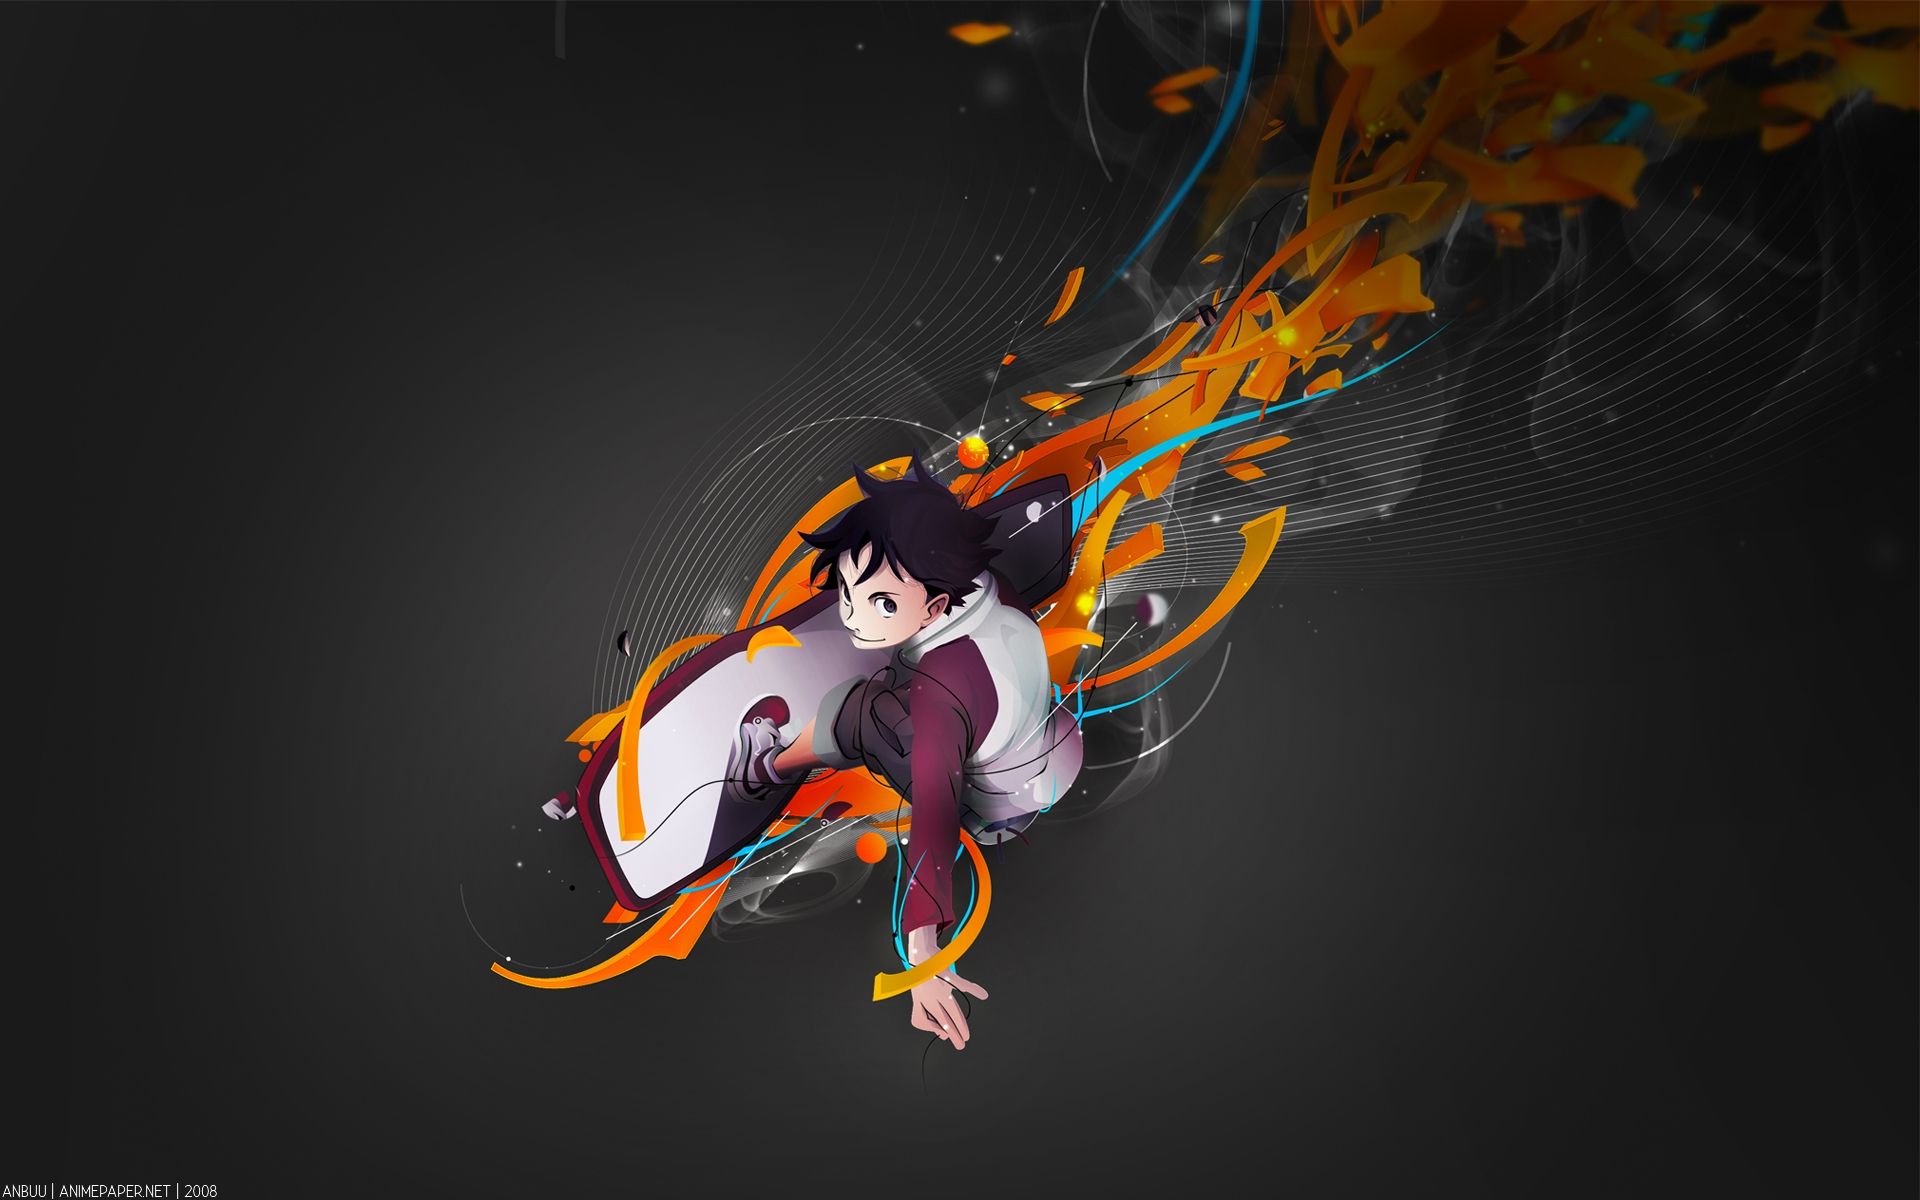 Download Anime Wallpaper 1920x1200. Full HD Background